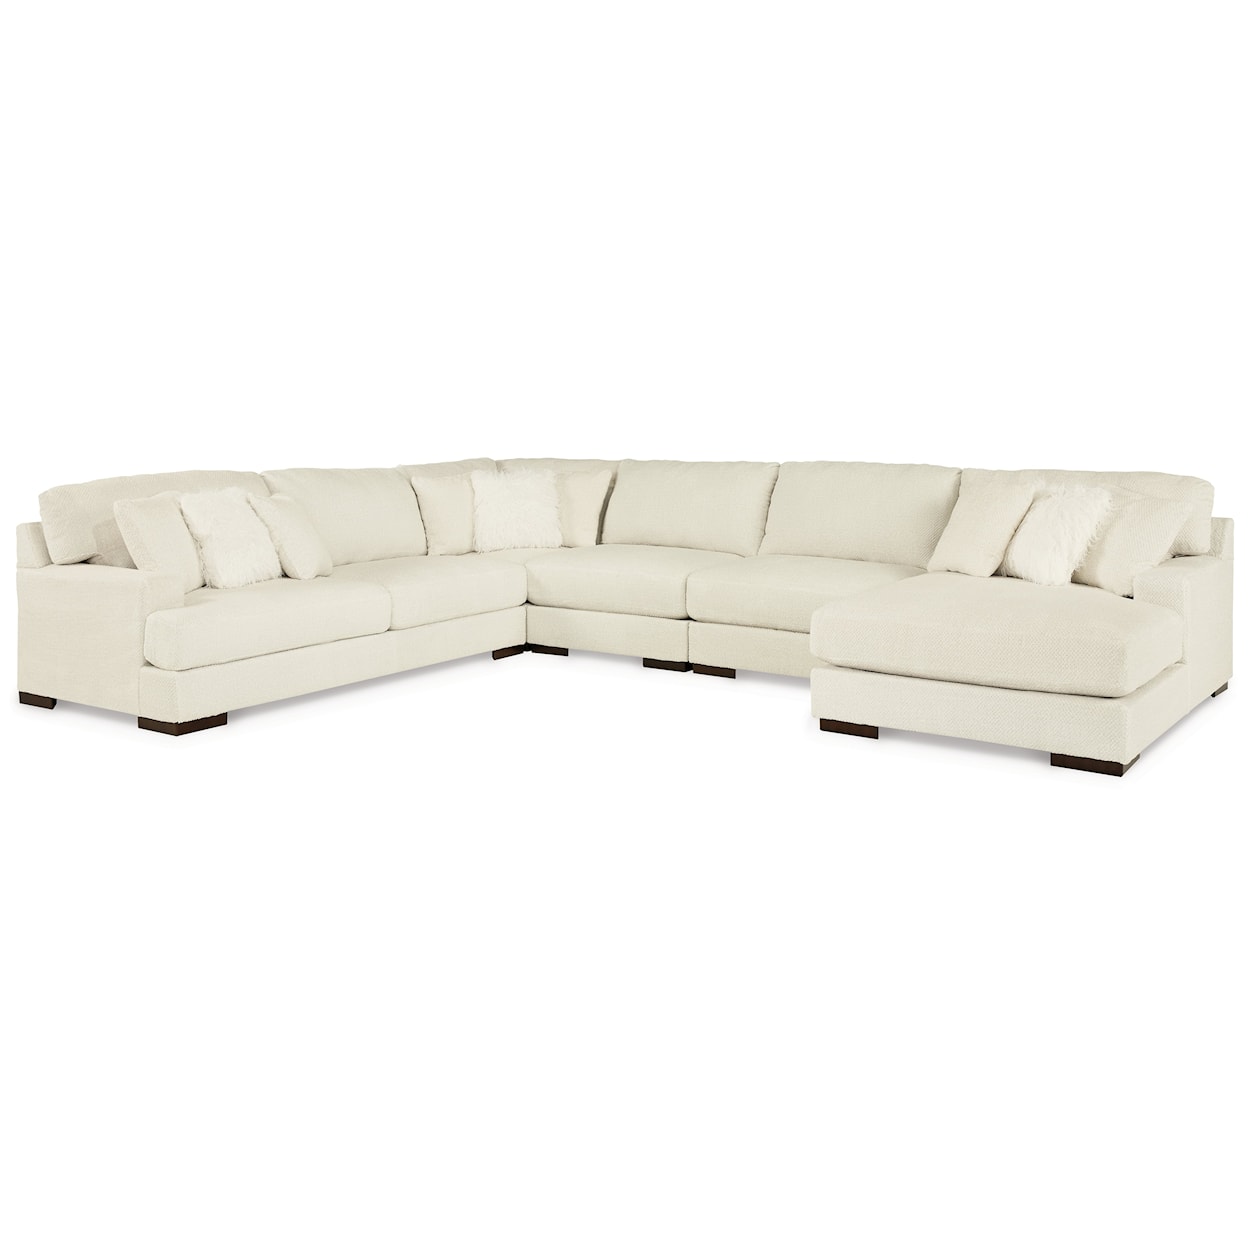 Signature Zada 5-Piece Sectional with Chaise